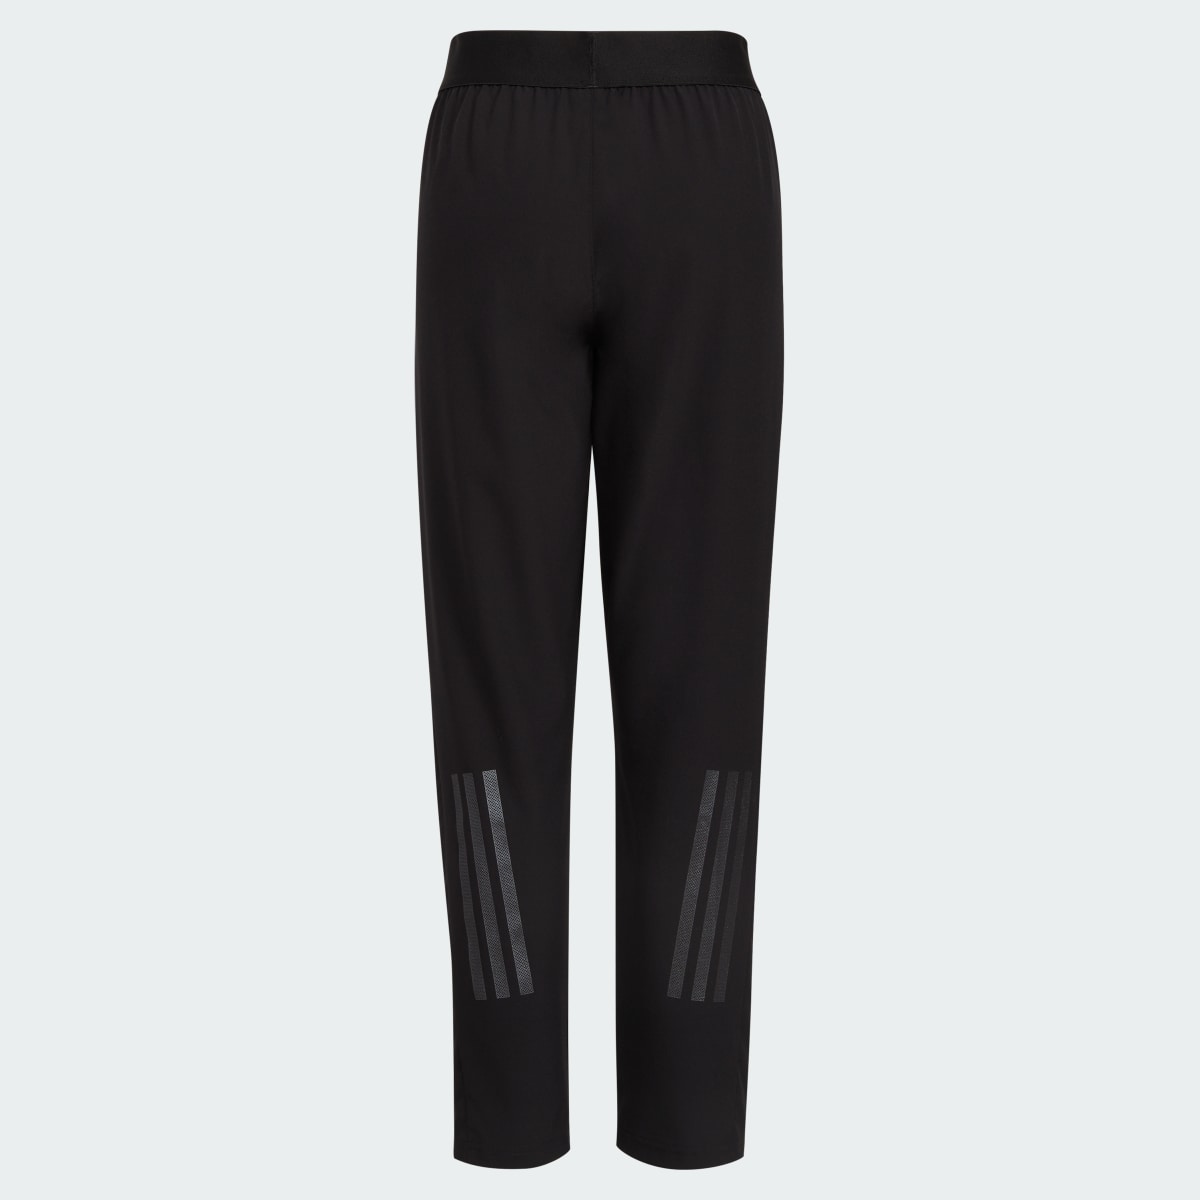 Adidas Designed for Training Stretch Woven Pants. 4